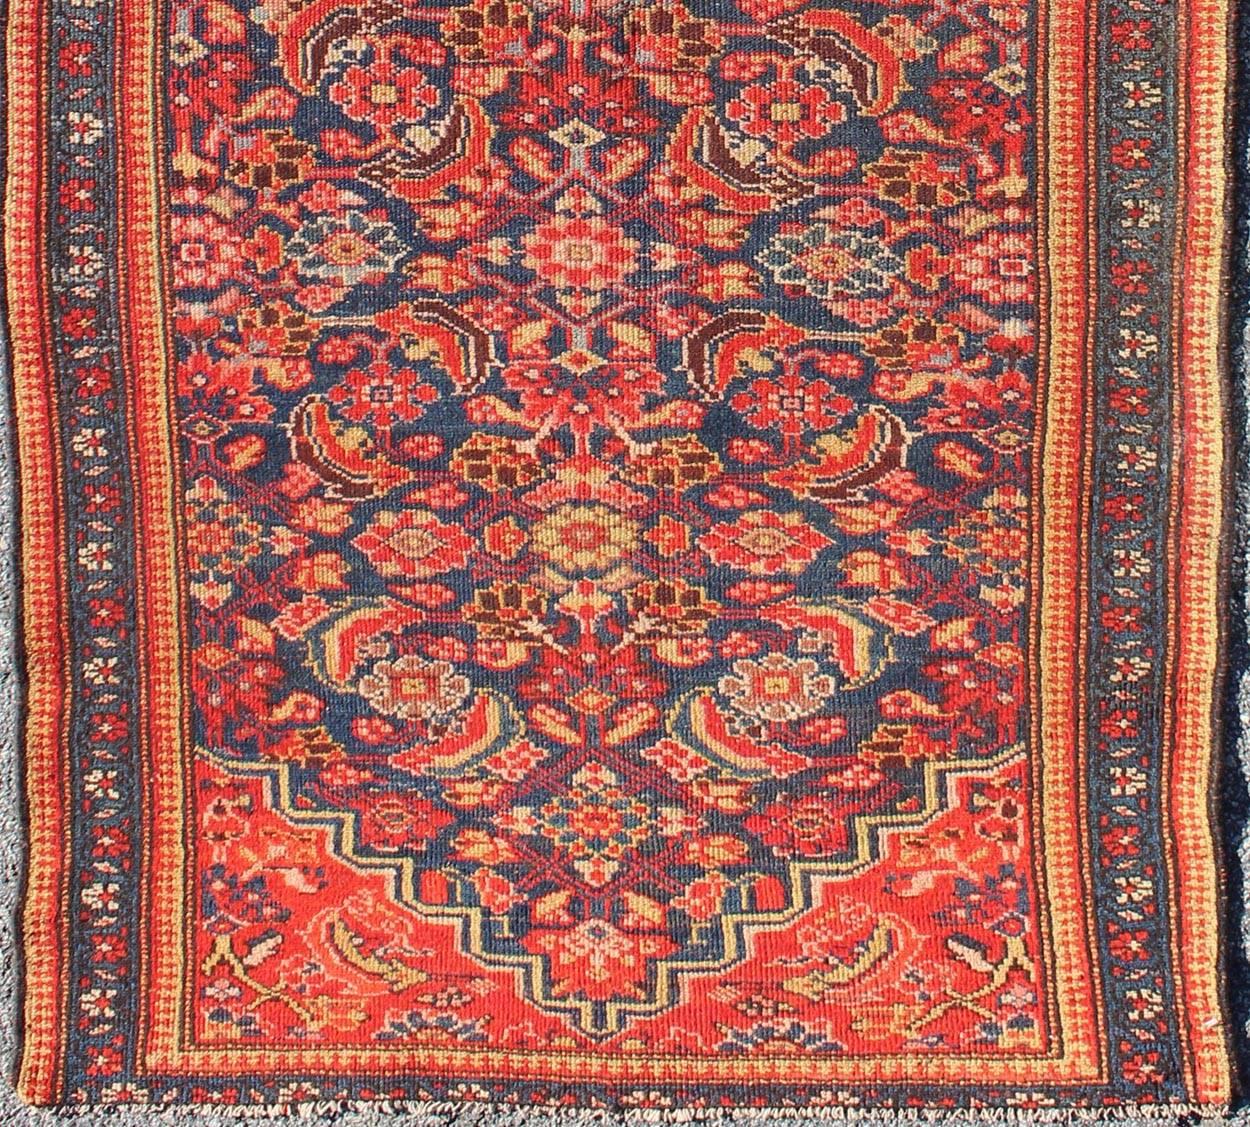 Red and Blue Antique Persian Malayer Rug with All-Over Floral Design, rug 13-1102, country of origin / type: Iran / Malayer, circa 1920

This antique Persian Malayer runner from early 20th century Iran (circa 1920) features an all-over floral